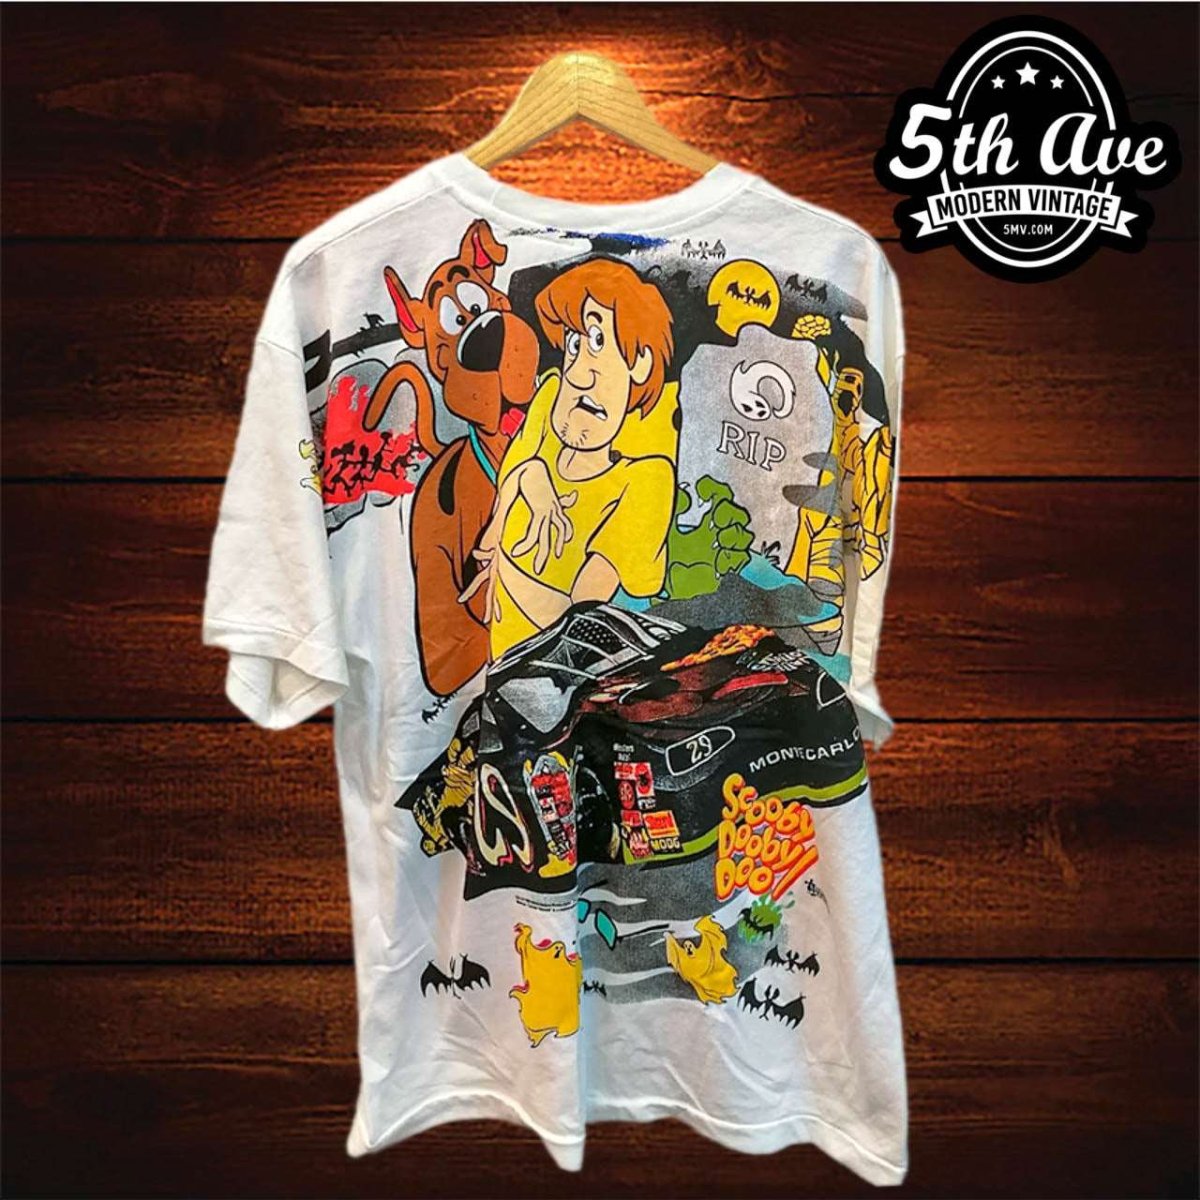 Scooby-Doo and NASCAR Mote Carlo Mysteries t shirt - Vintage Band Shirts